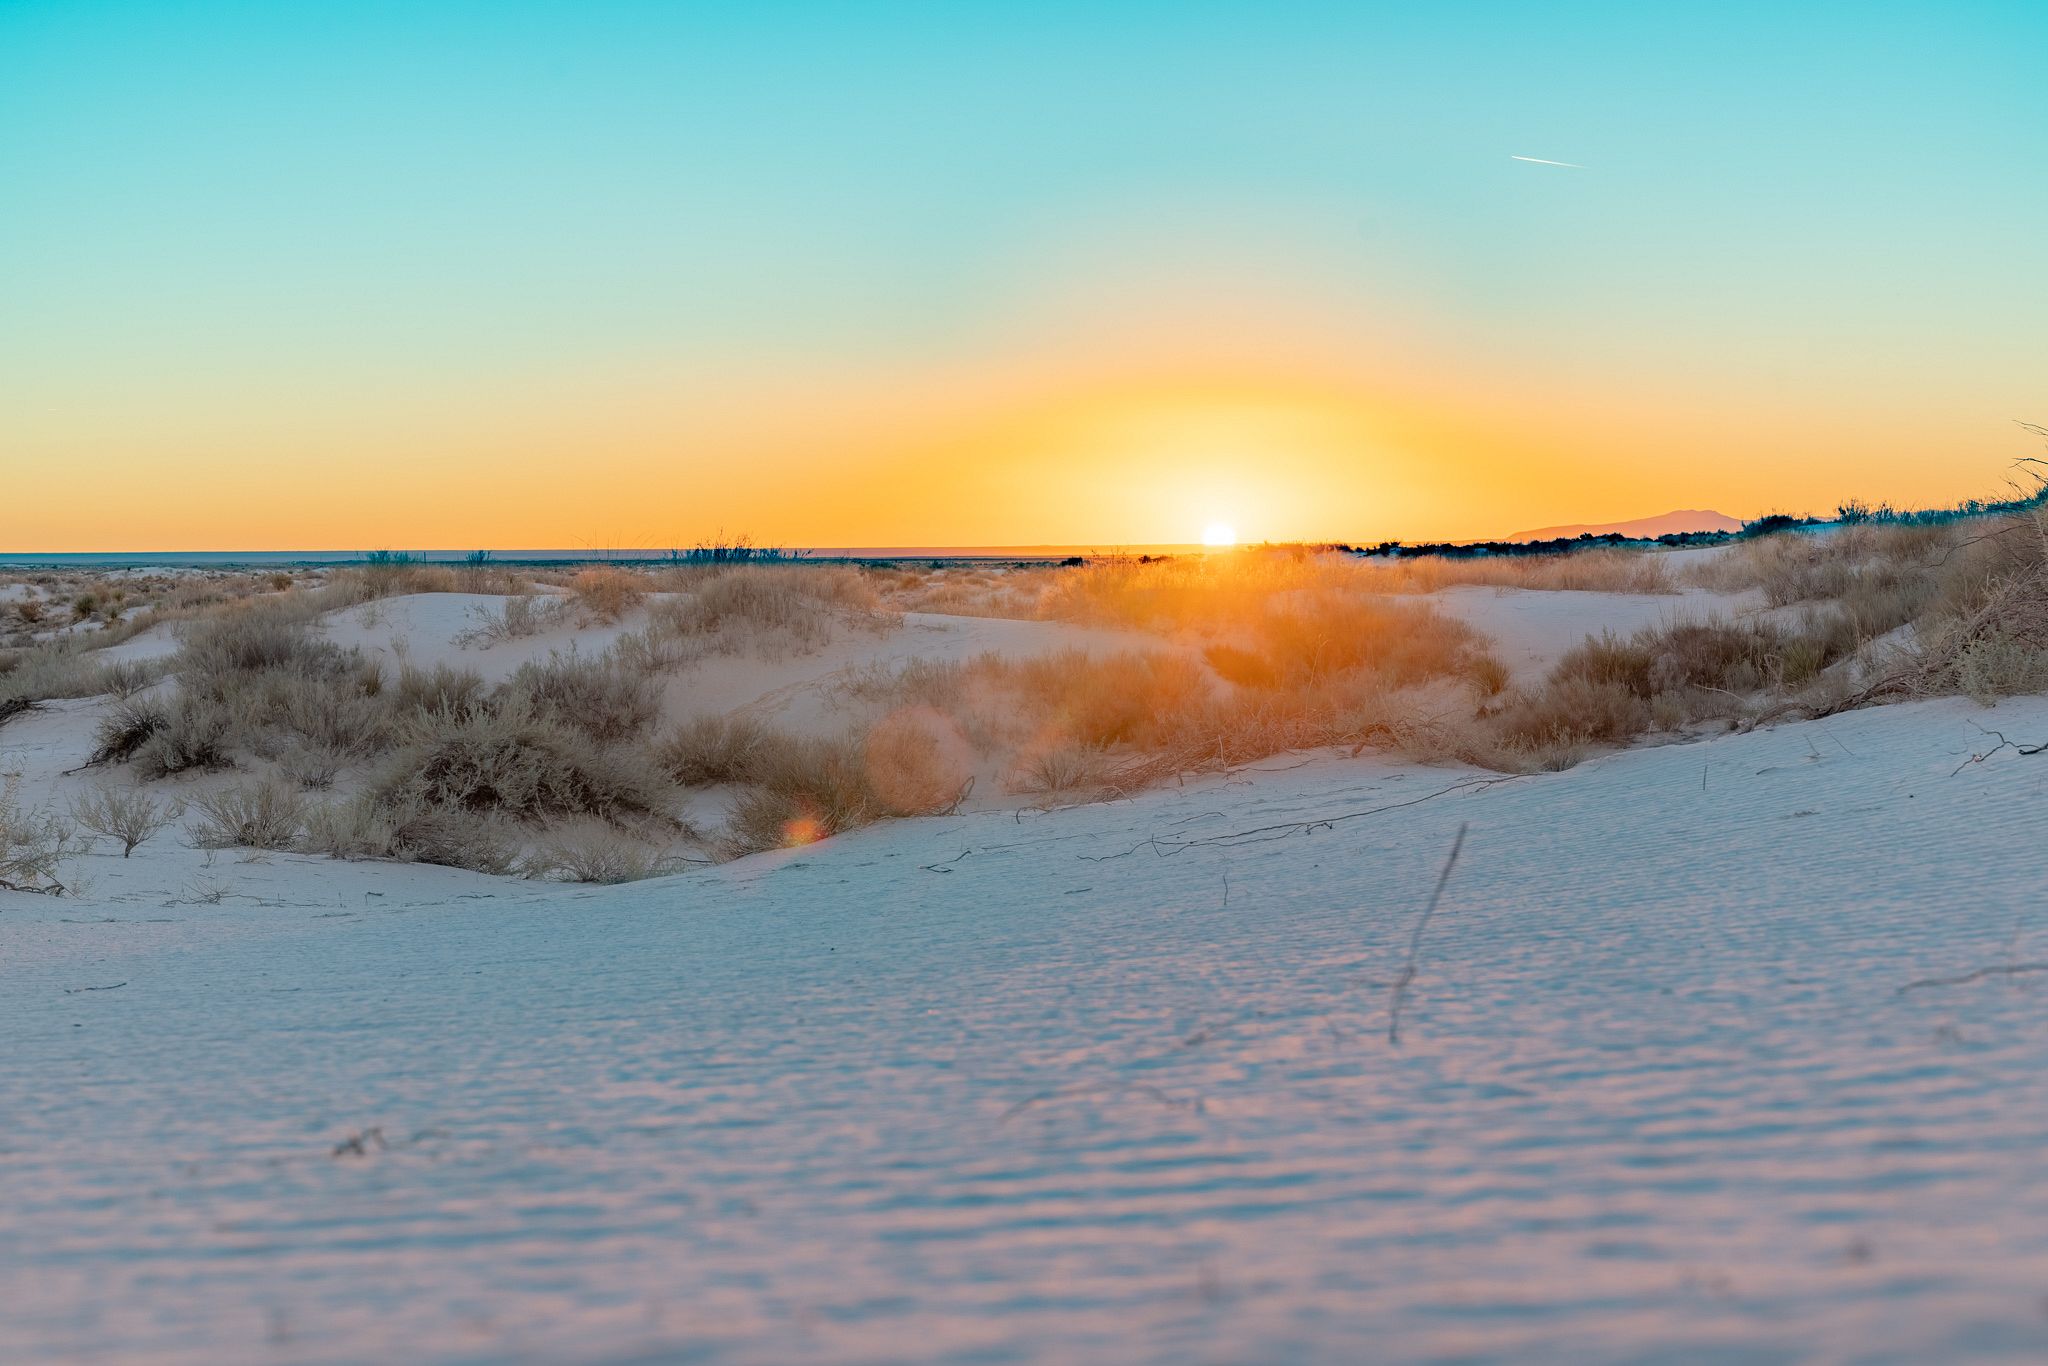 Guadalupe Dunes at Sunset